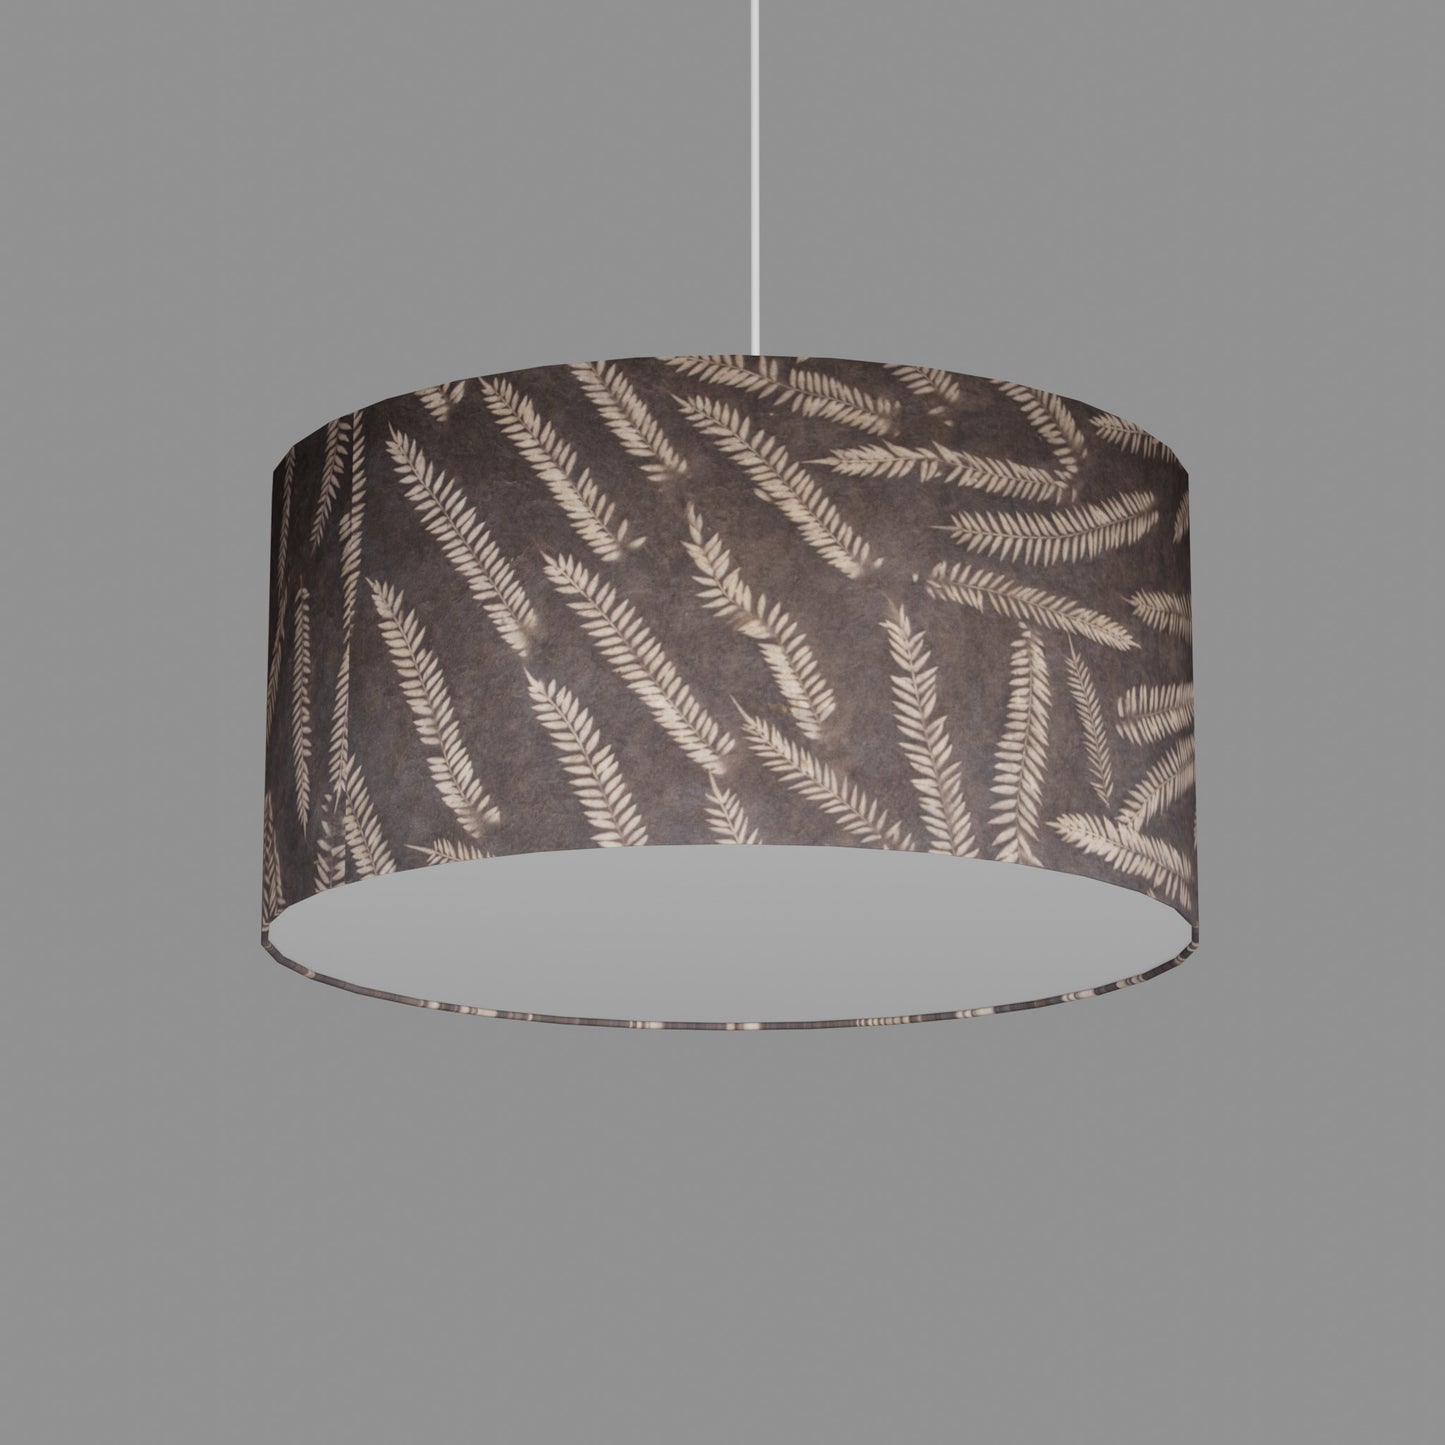 Drum Lamp Shade - P26 - Resistance Dyed Brown Fern, 50cm(d) x 25cm(h)